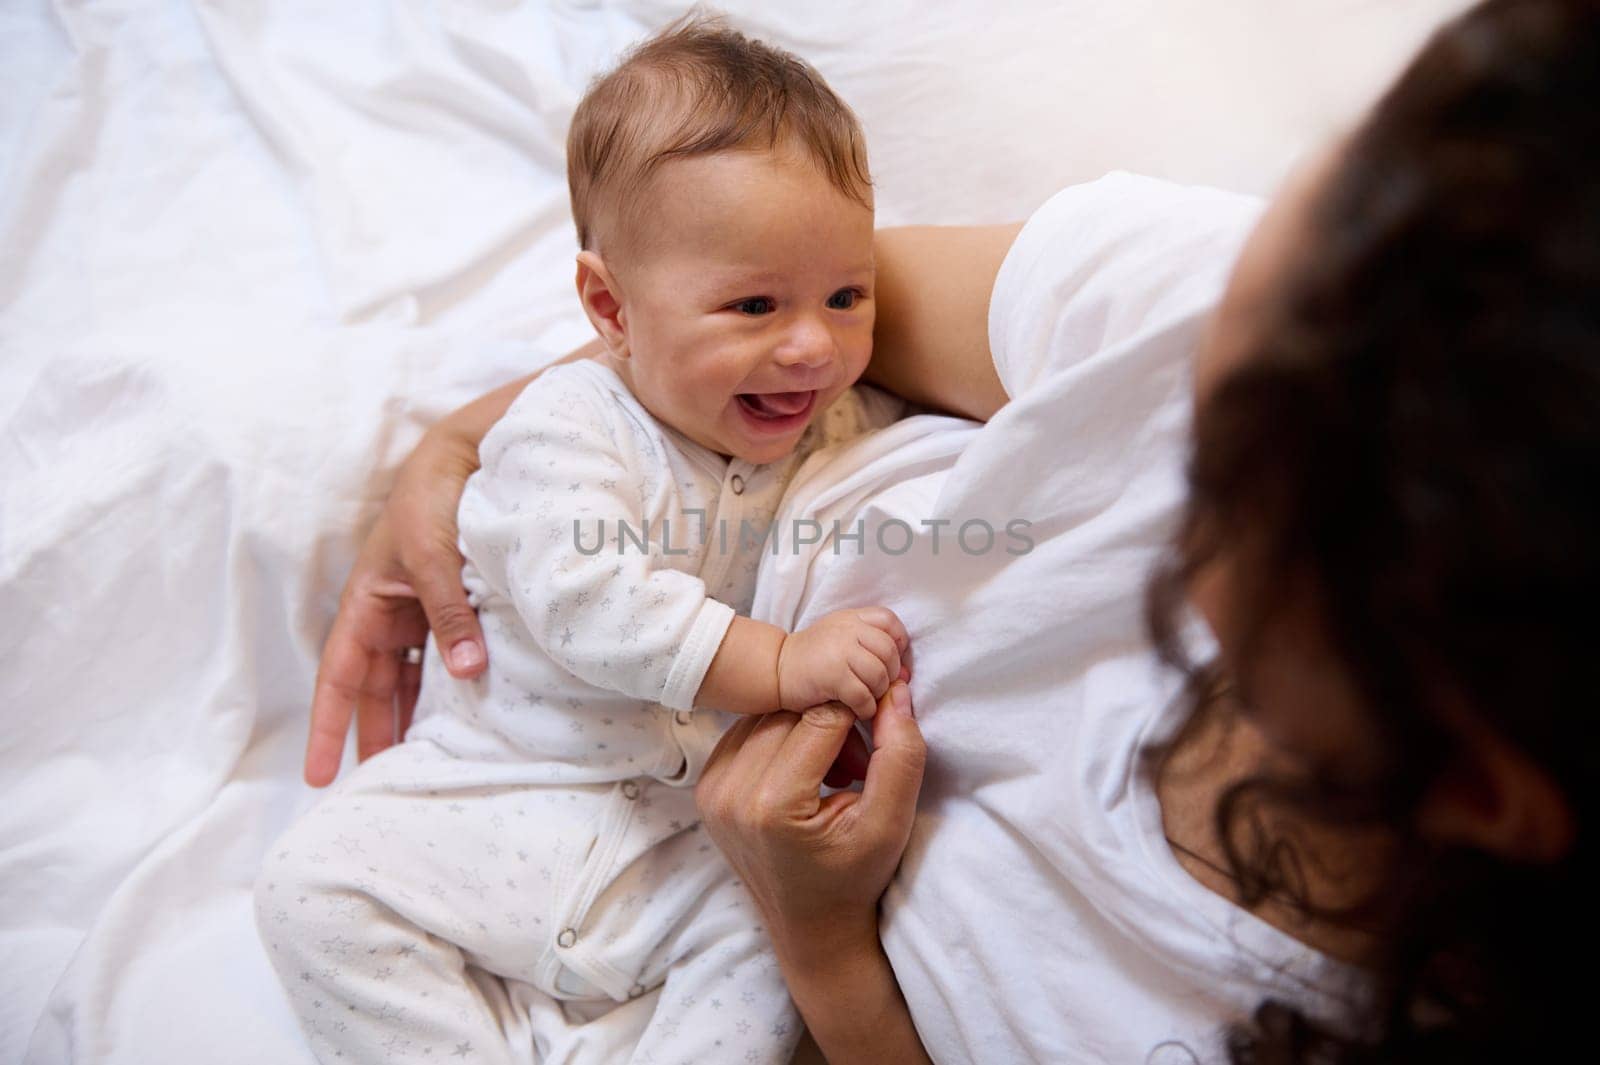 Authentic lifestyle portrait of a multi ethnic happy woman mother cuddling her baby boy, sitting together on the bed in bedchamber interior. People. Maternity leave lifestyle. Copy advertising space